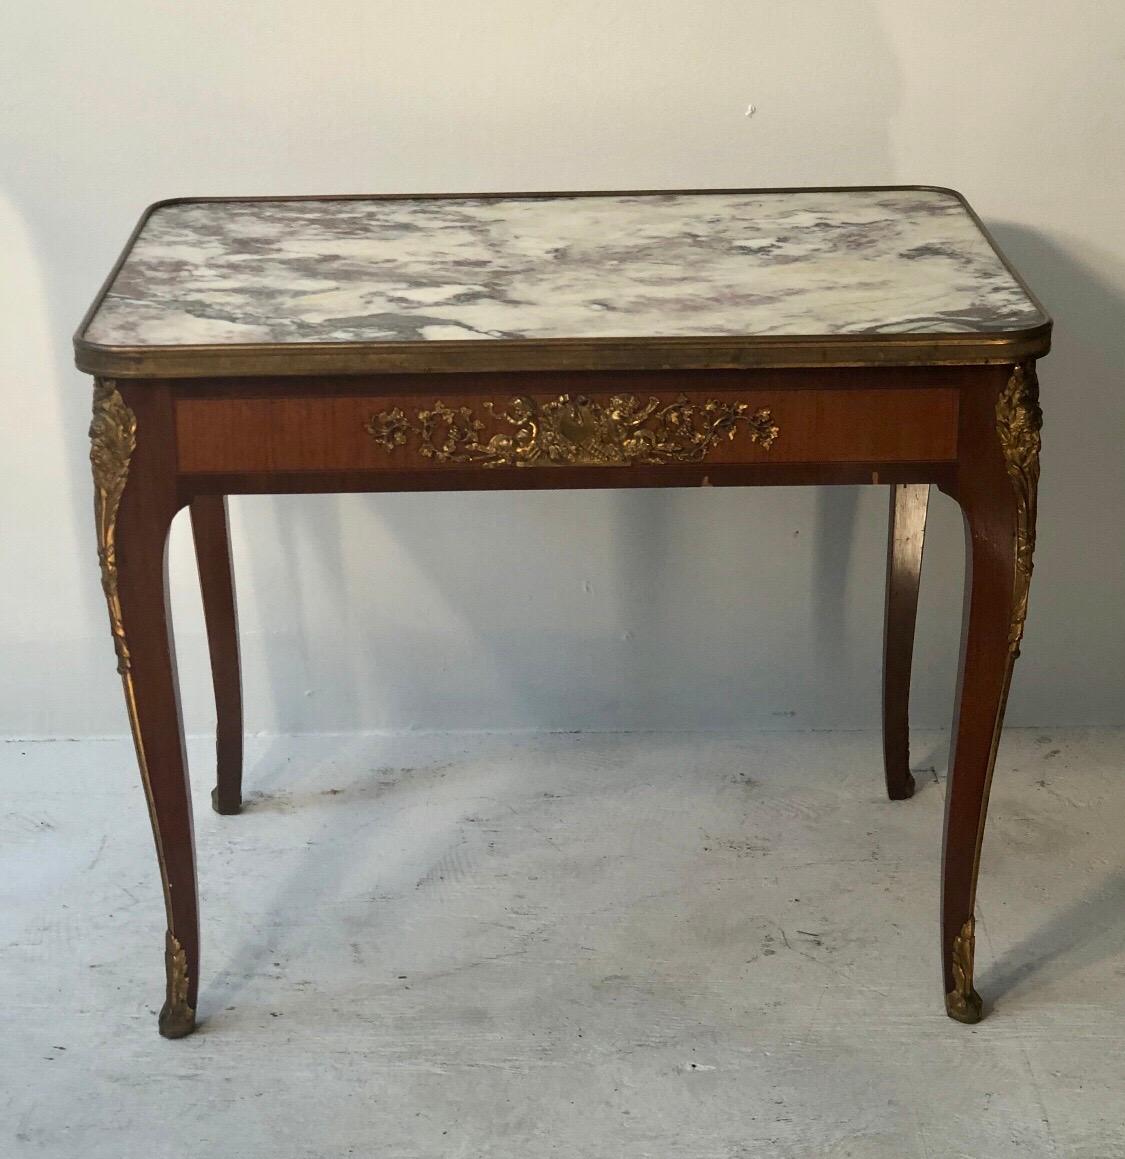 This elegant Louis XV style marble top coffee table is made out of walnut with satinwood inlay. The table has exquisite detailed bronze mounts and a bronze band around the marble top.